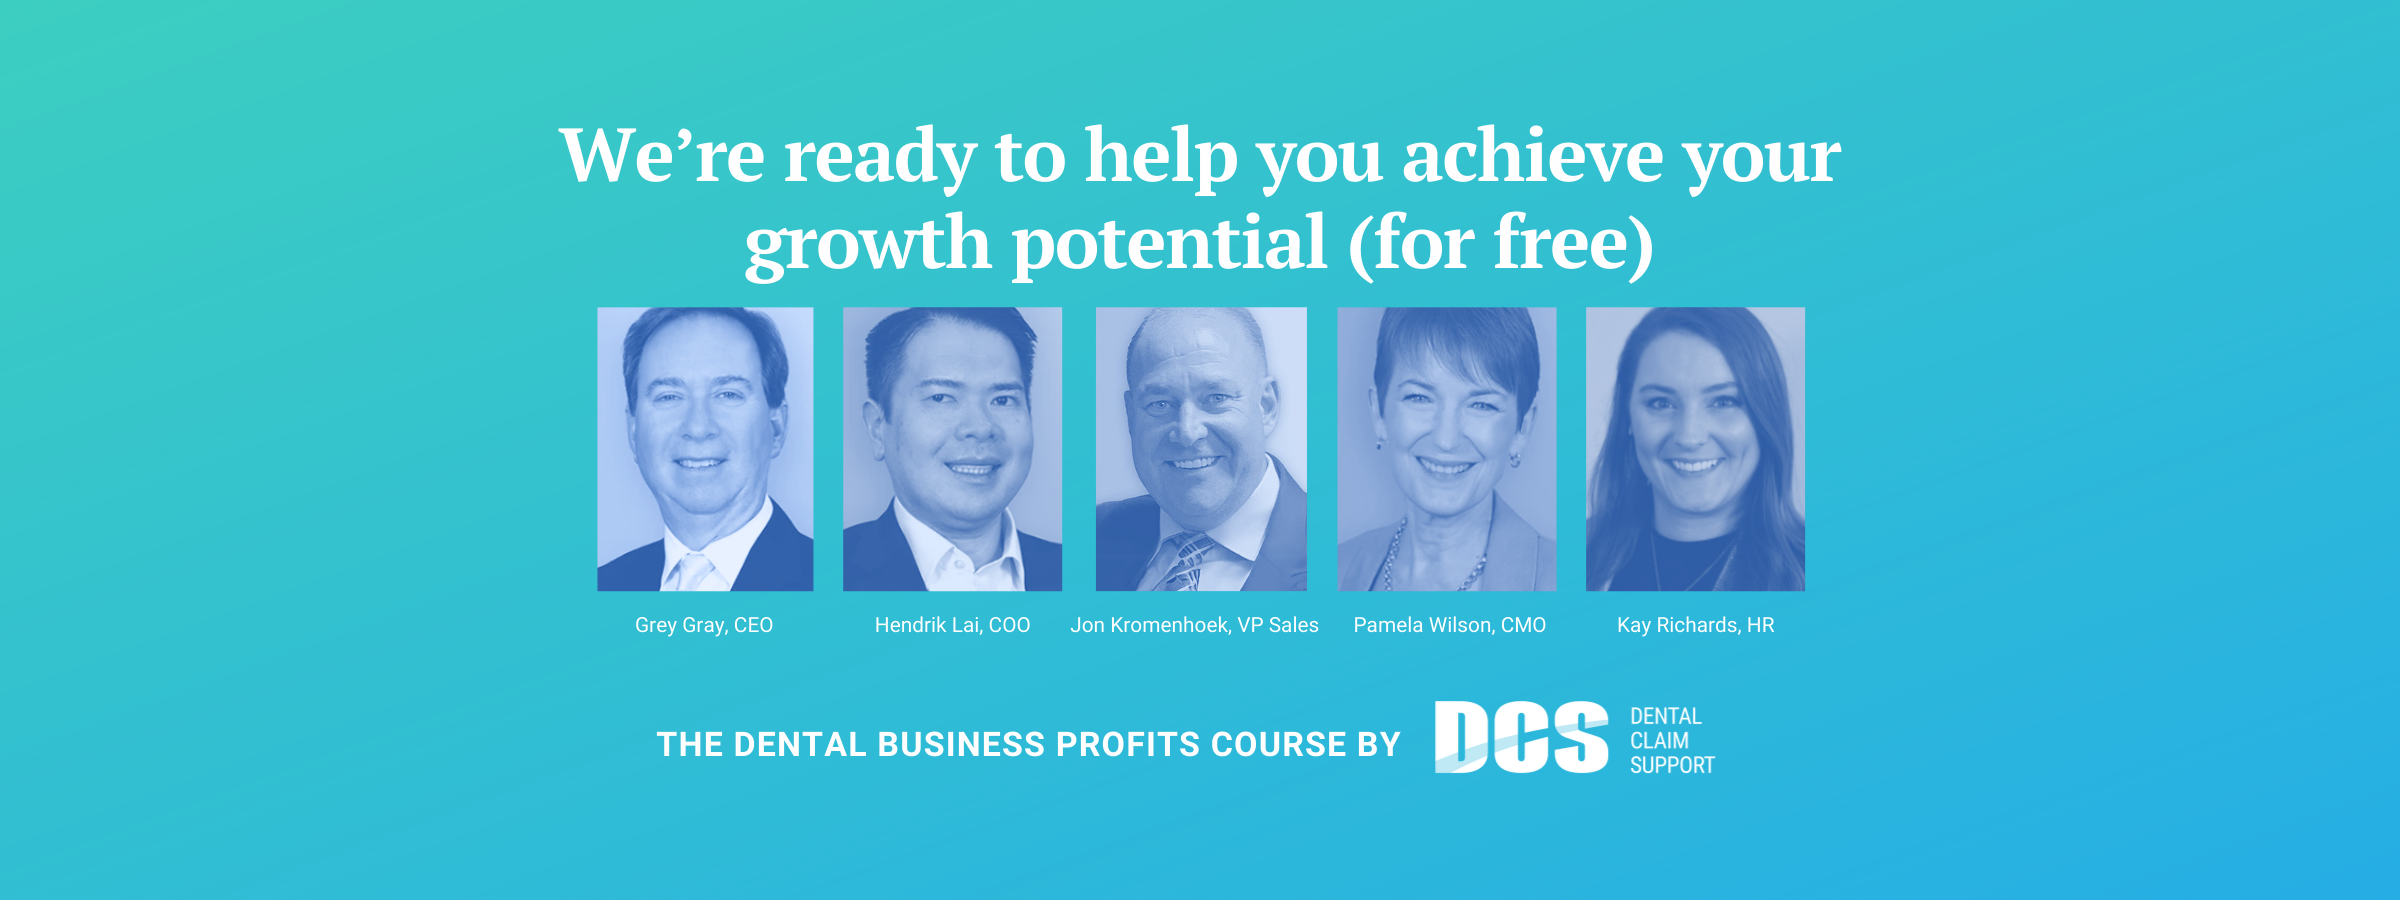 3 key takeaways from our Dental Business Profits course that lead to boosted revenue